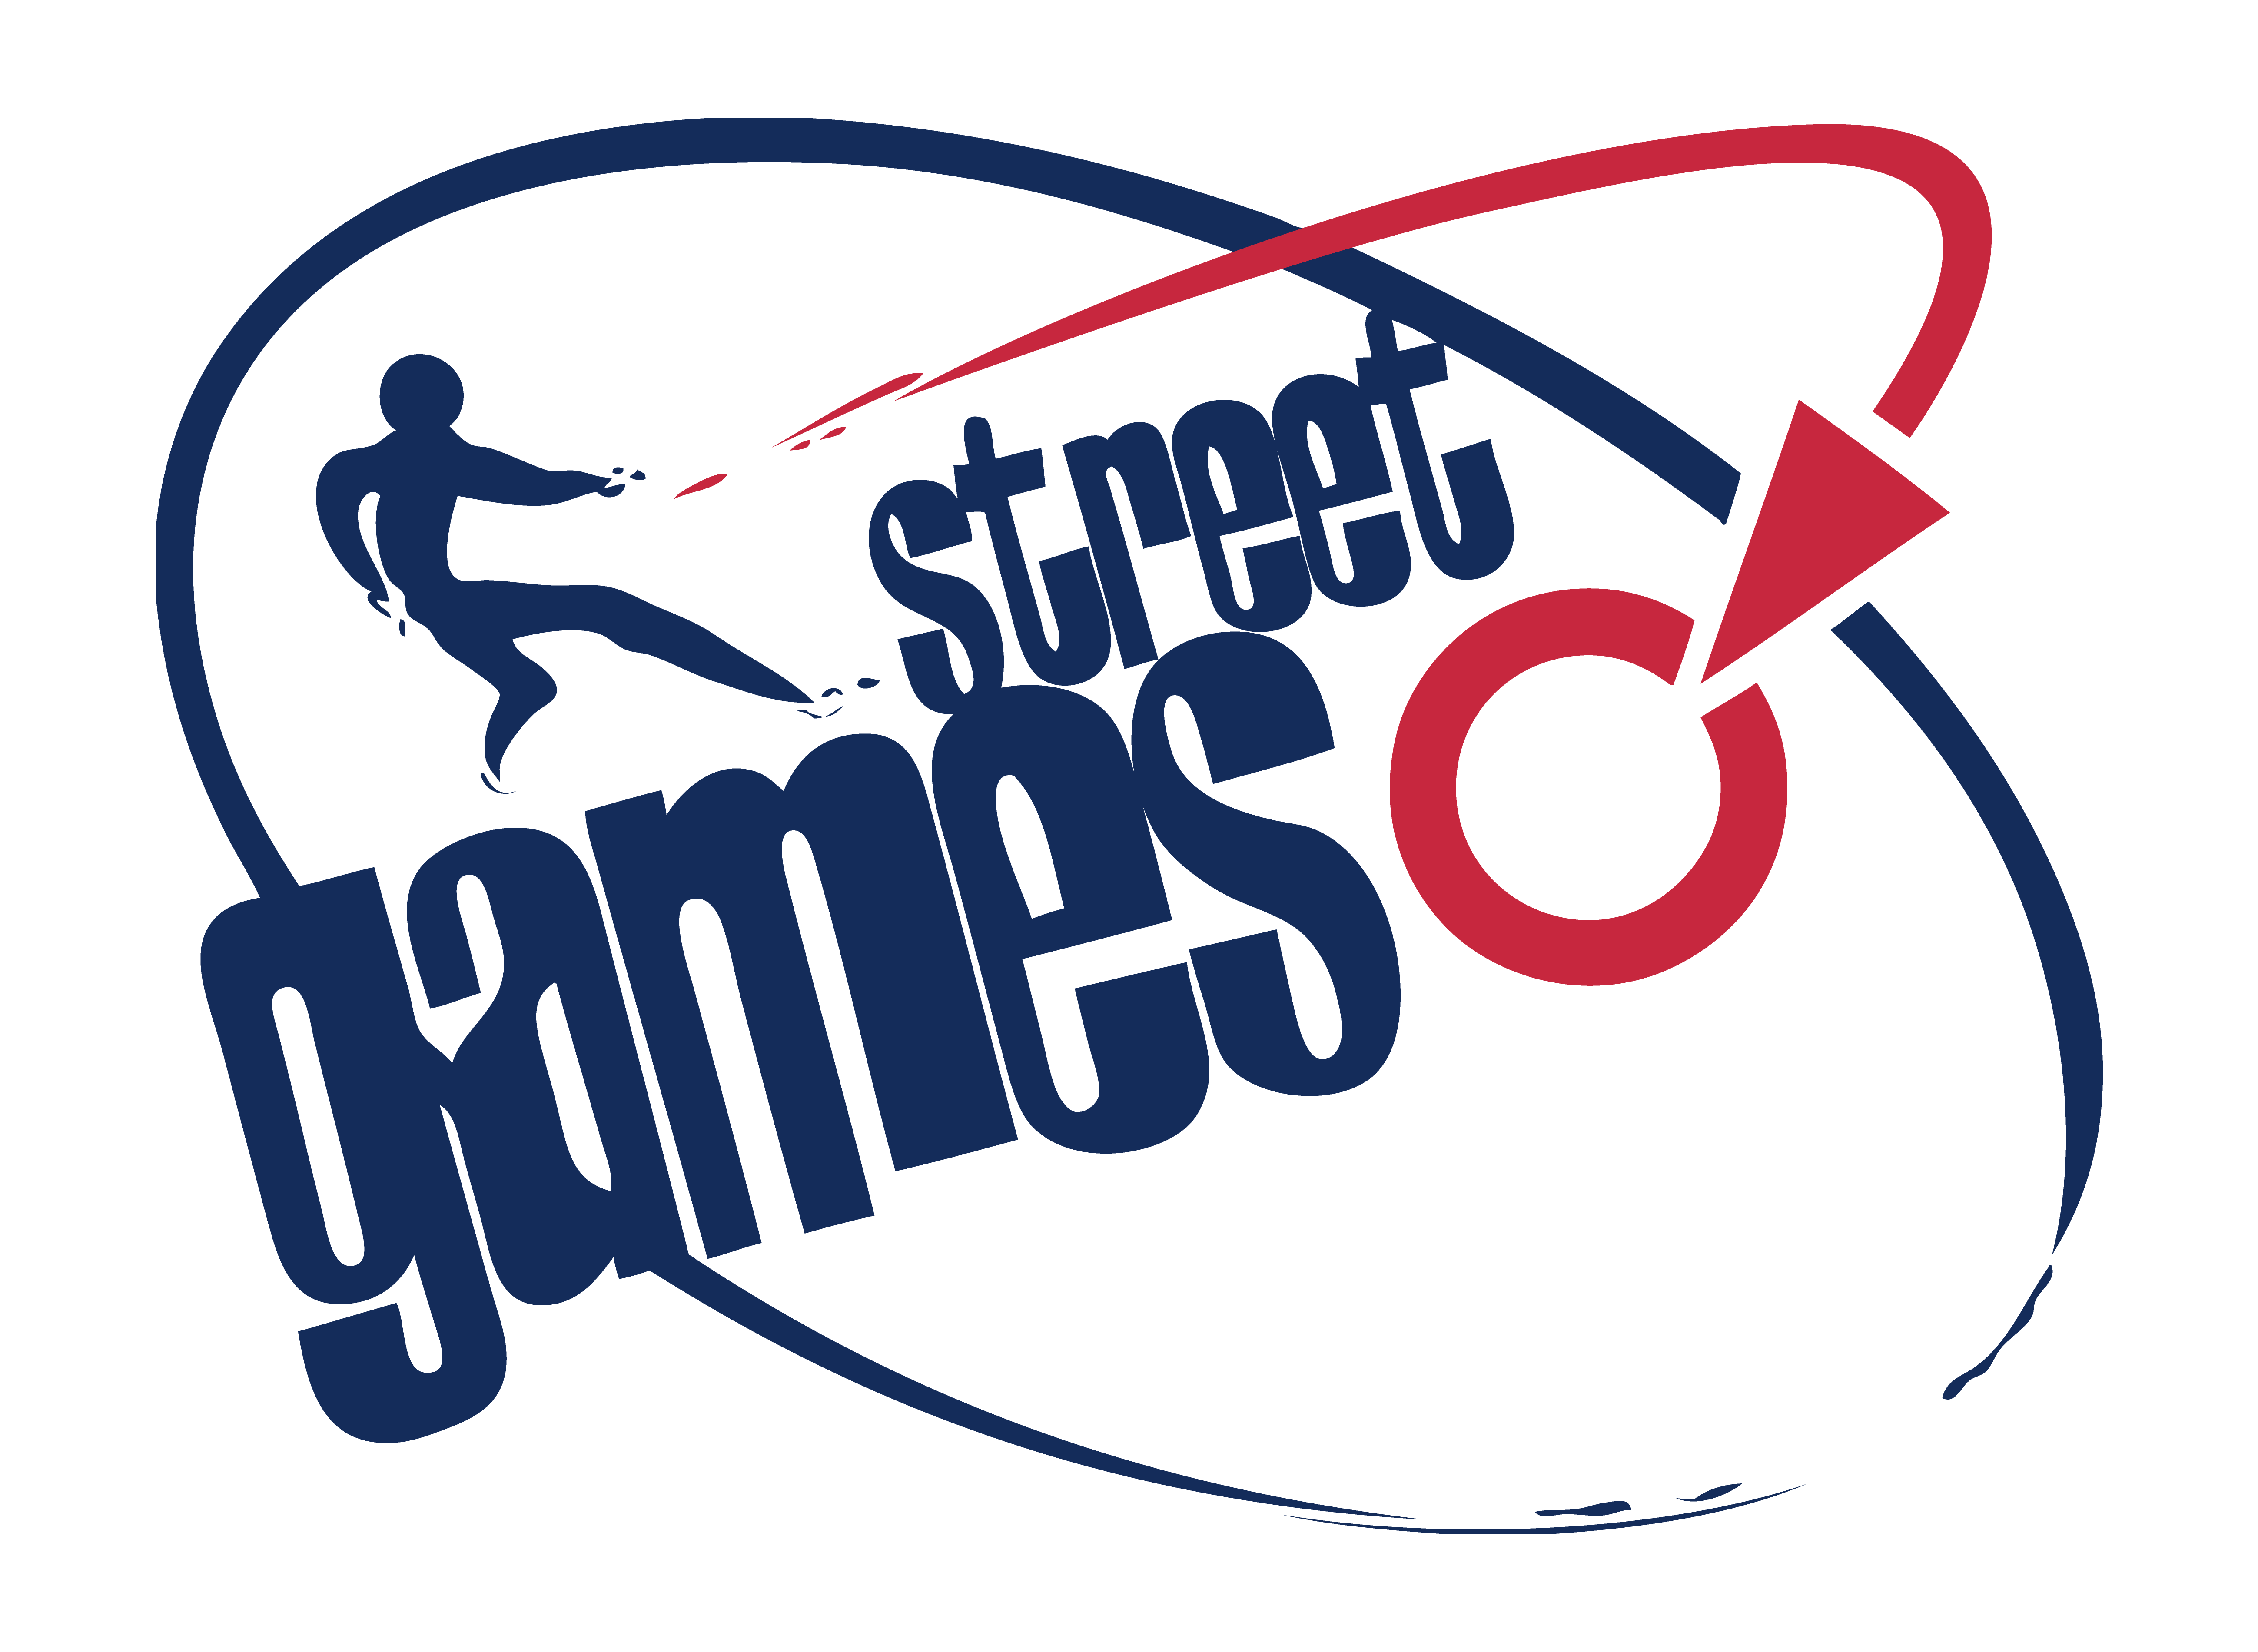 Street Games logo with person figure kicking a ball in abstract design